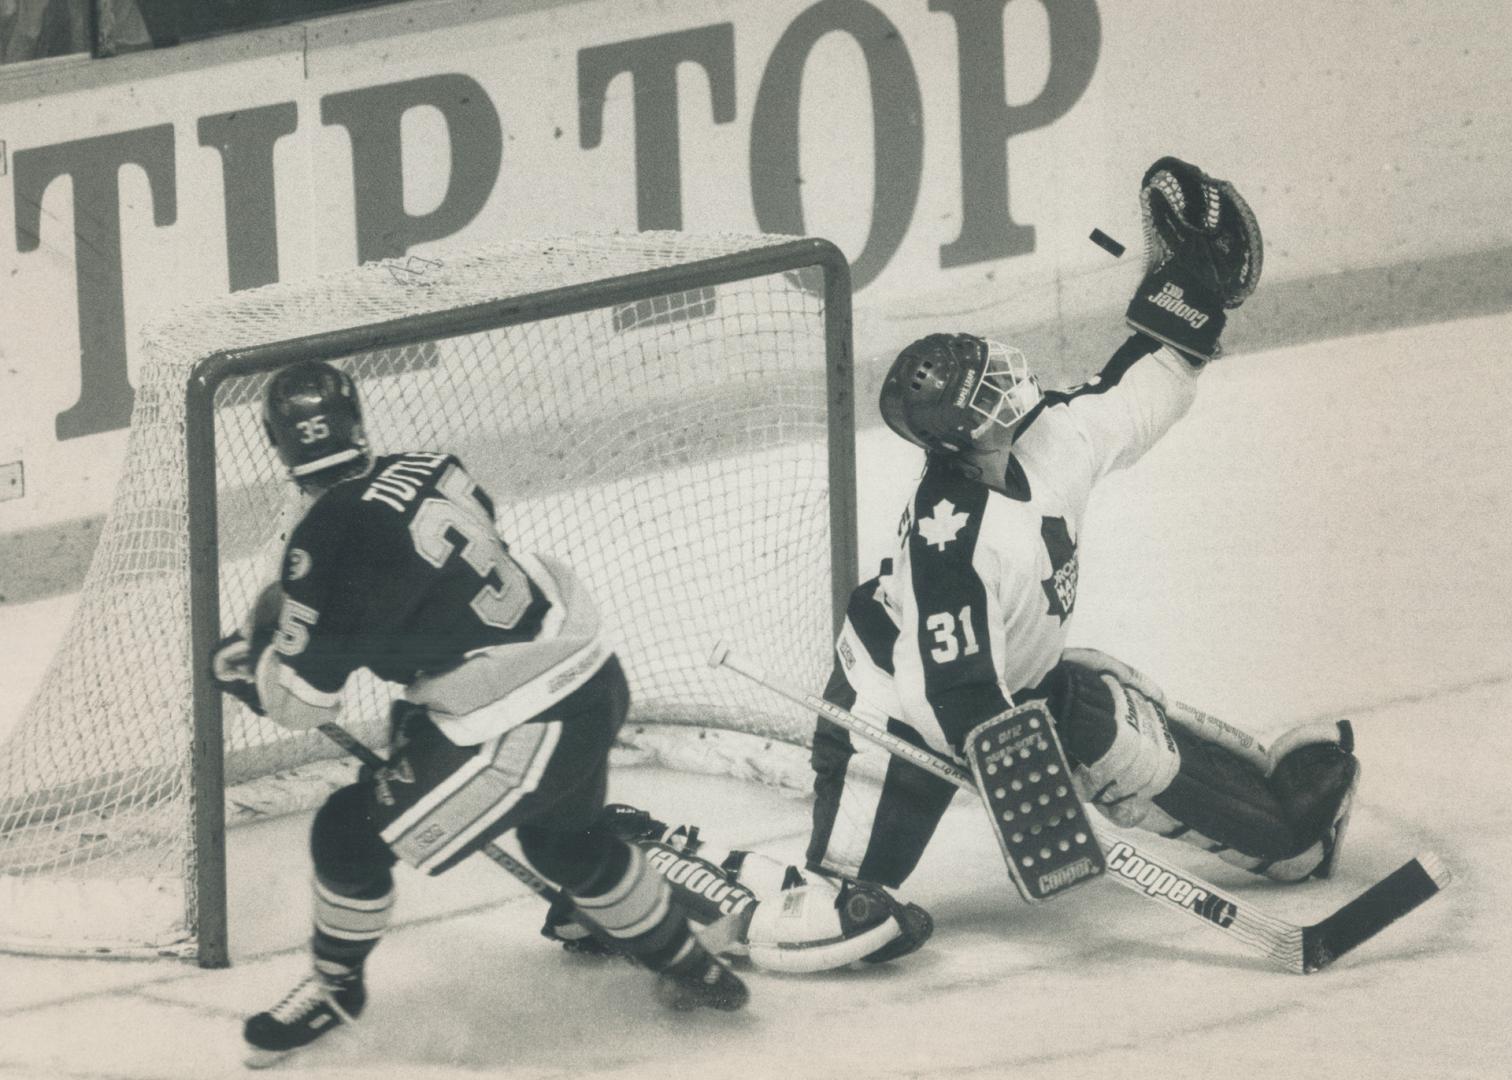 Not this time: Leafs goalie Ken Wregget gets a glove on the puck as Blues winger Steve Tuttle moves into the net during last night's game at the Gardens